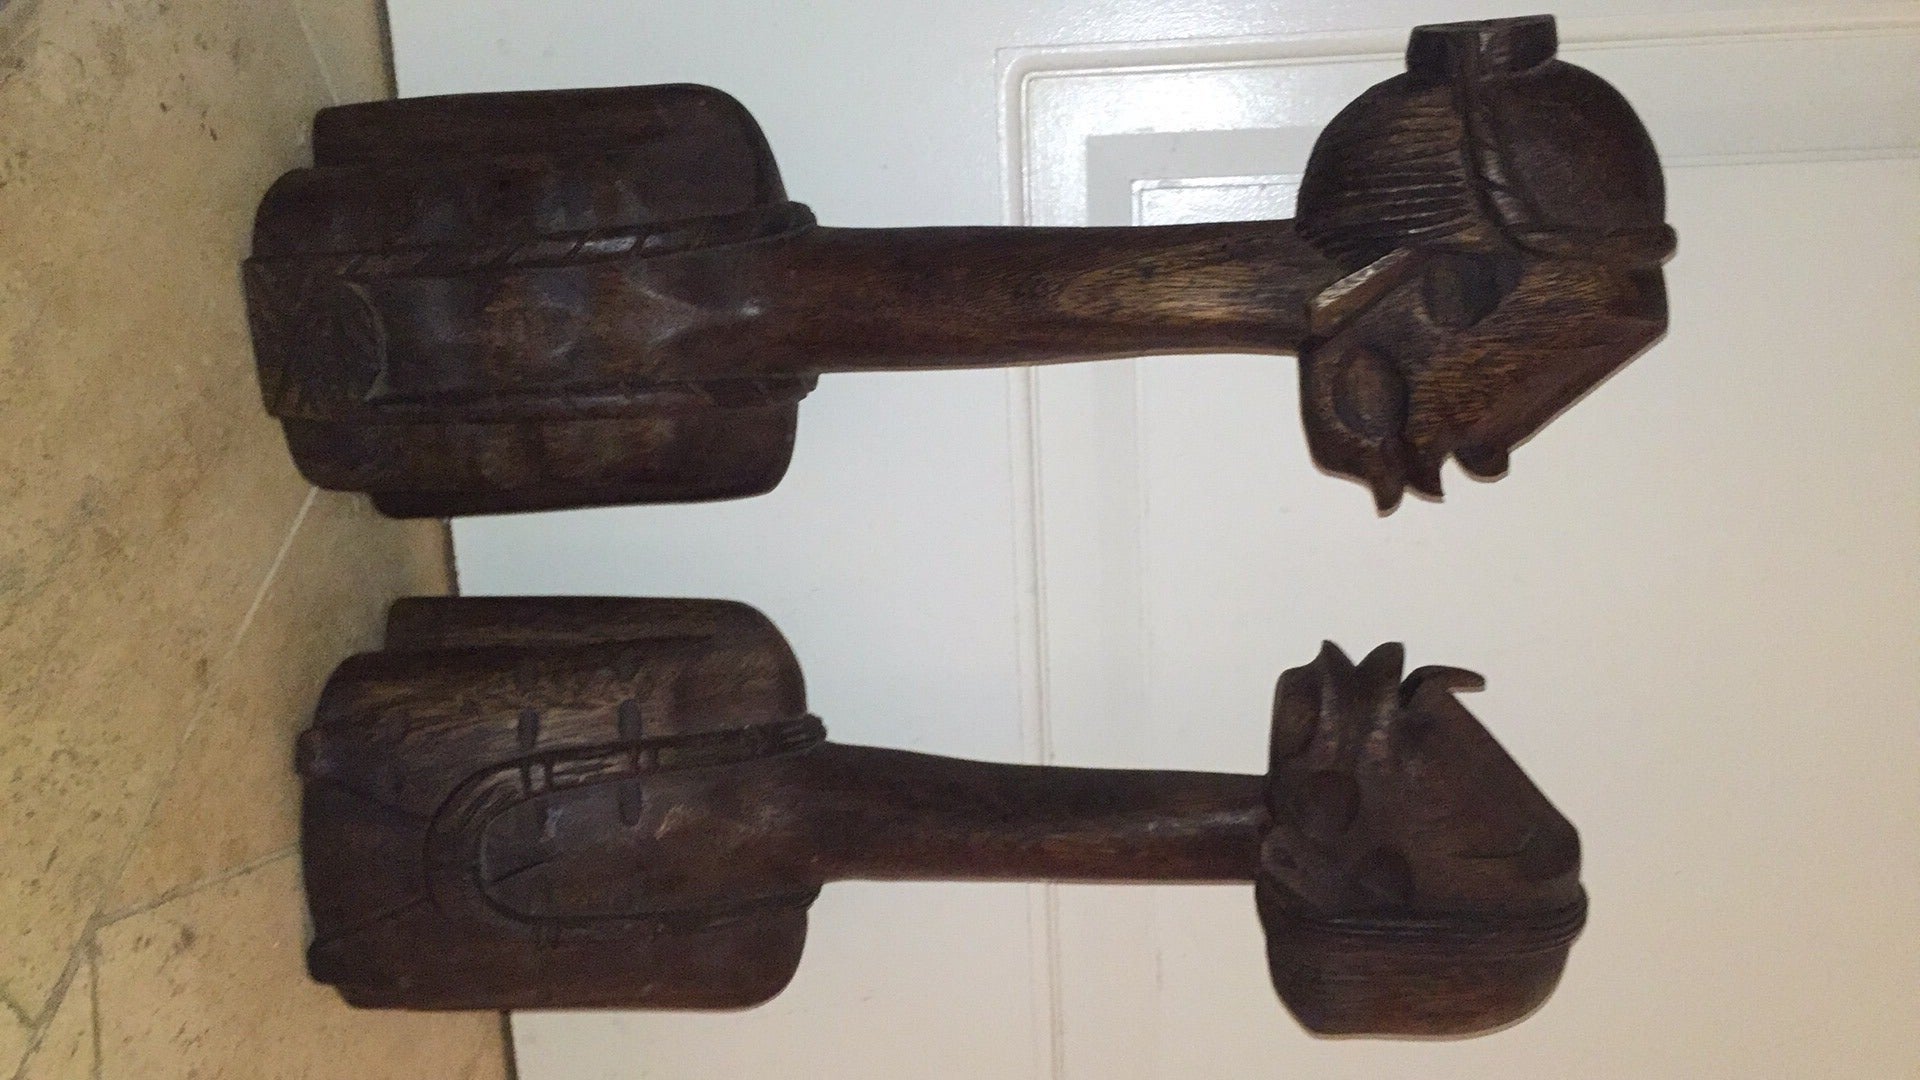 Terrific pair of vintage whimsical hand-carved wood sculptures. This interesting pair depict a long neck tribal male and female possibly African, Jamaican or Haitian. Truly a unique pair of sculptures in person.